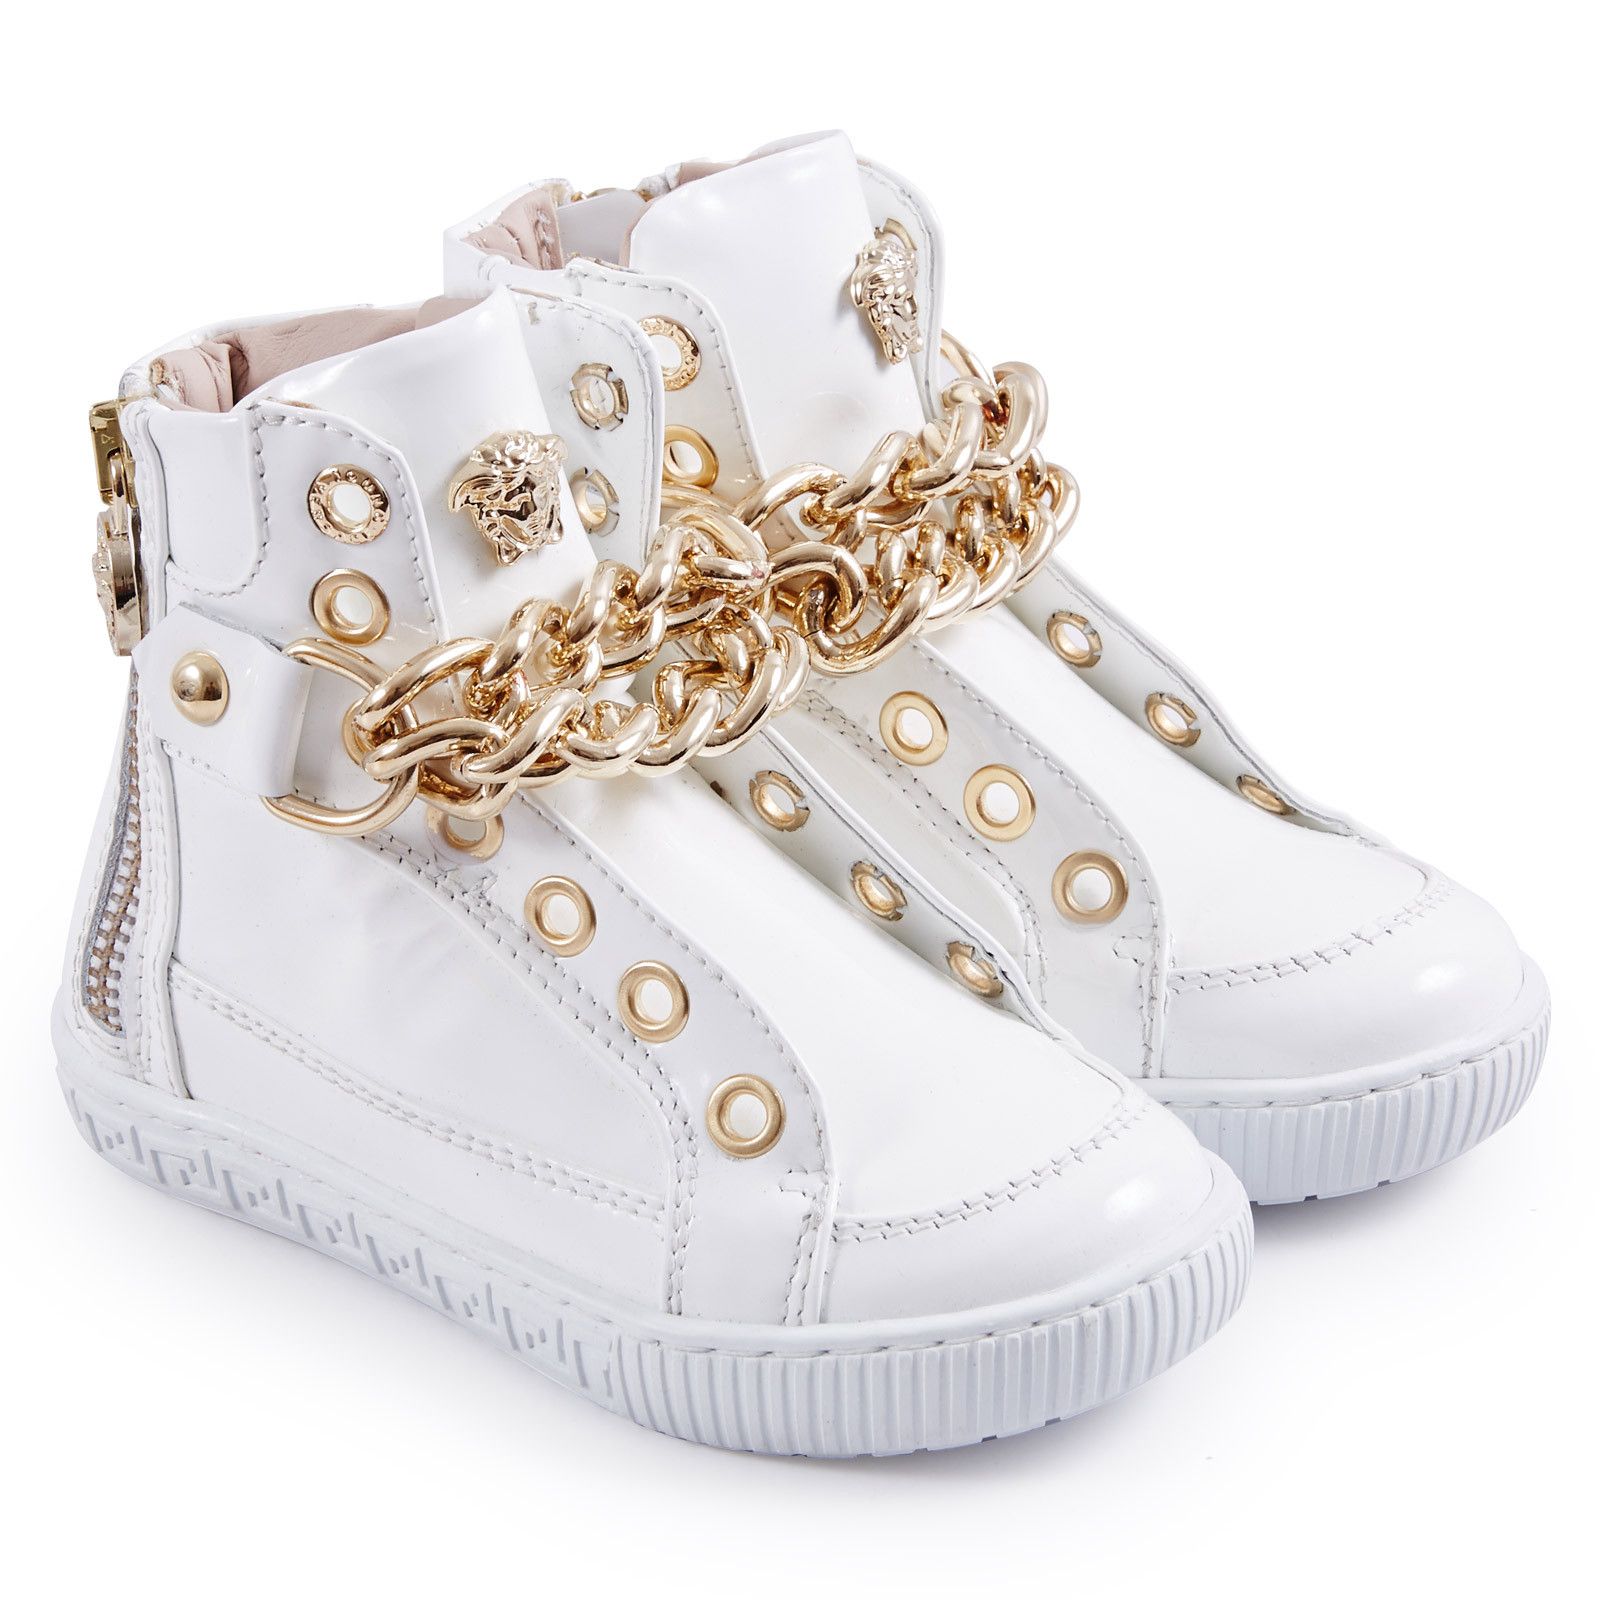 Girls White Patent Leather High-Top Trainers - CÉMAROSE | Children's Fashion Store - 1